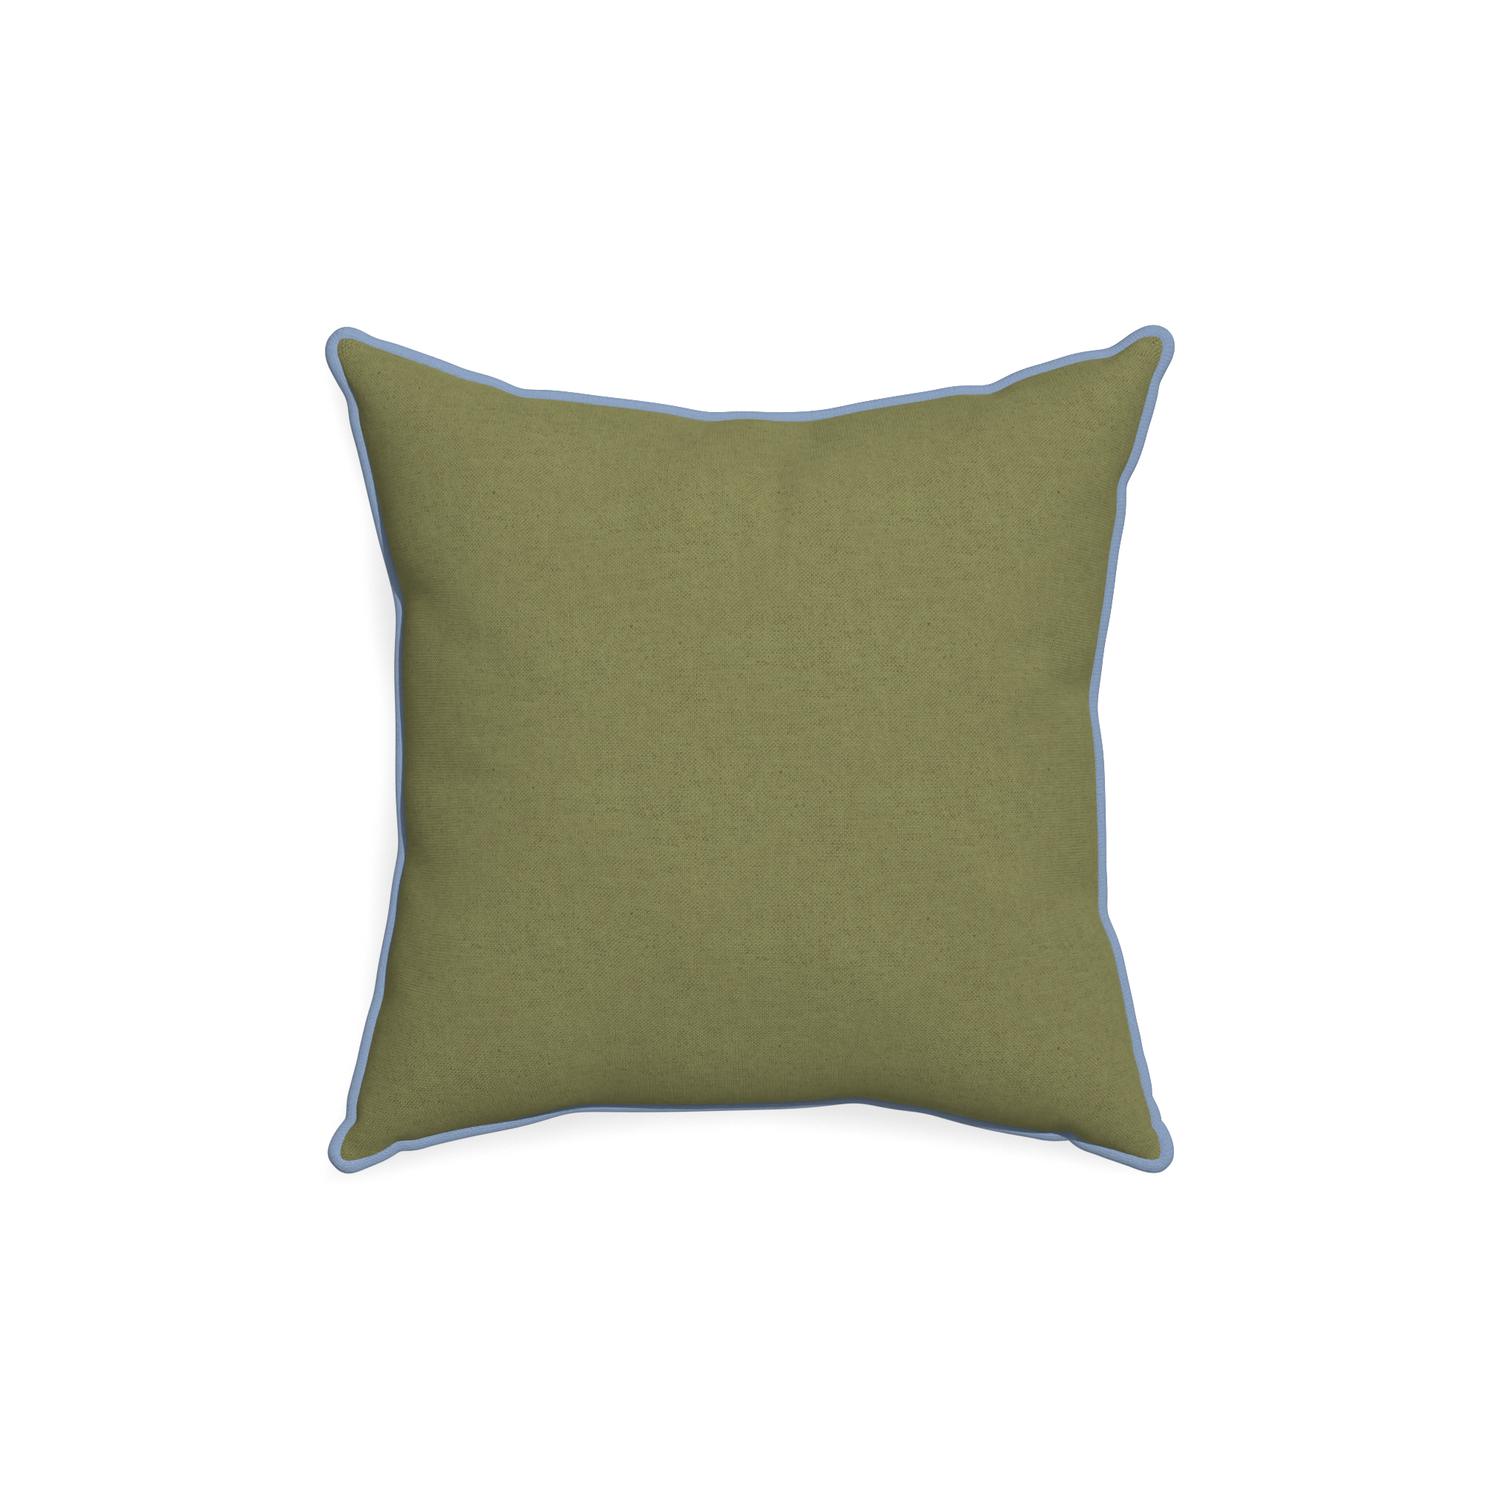 18-square moss custom moss greenpillow with sky piping on white background